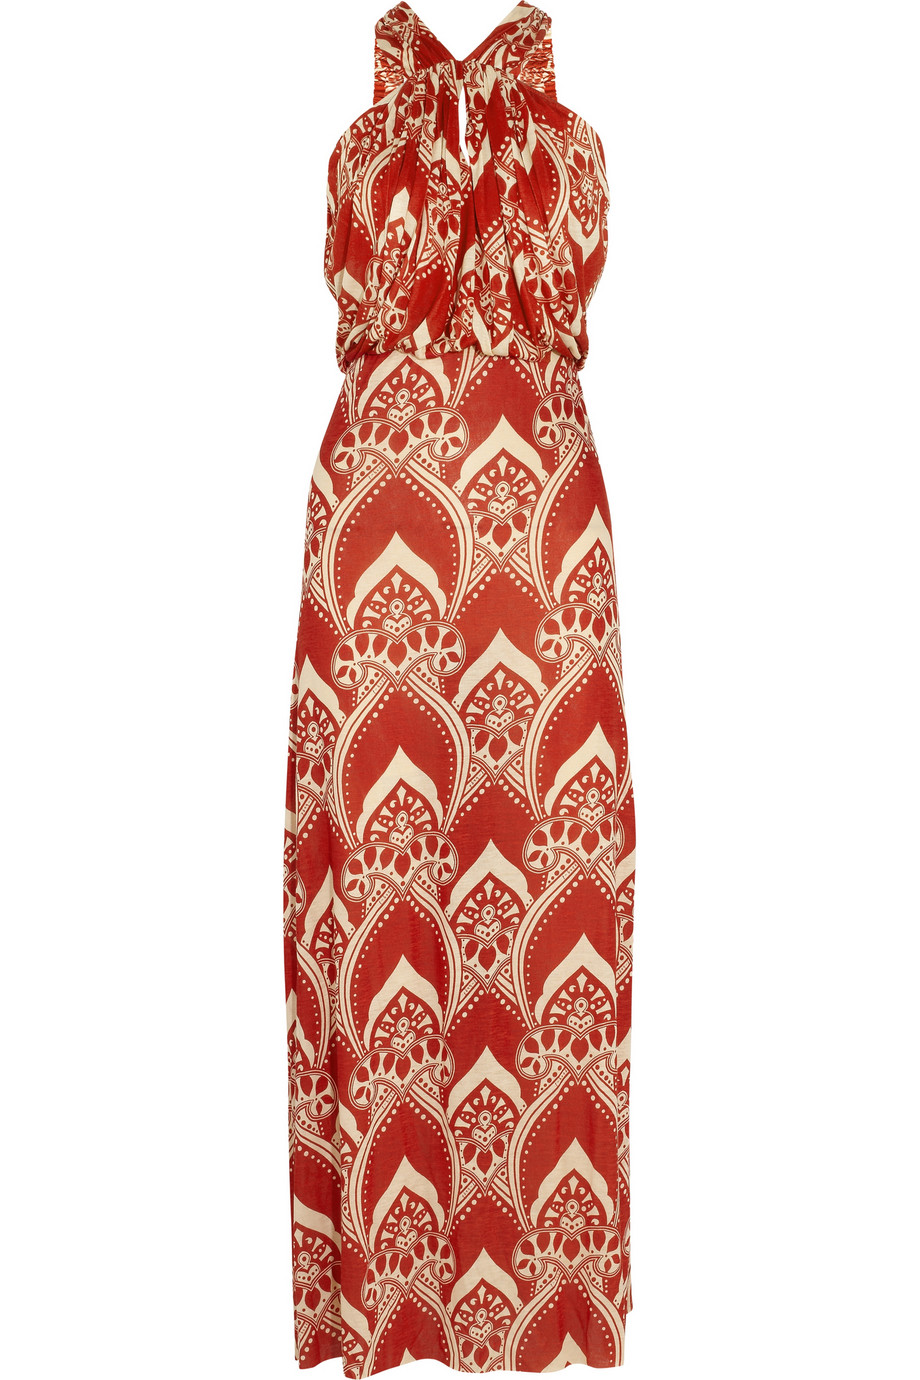 Lyst - T-bags Printed Jersey Maxi Dress in Red